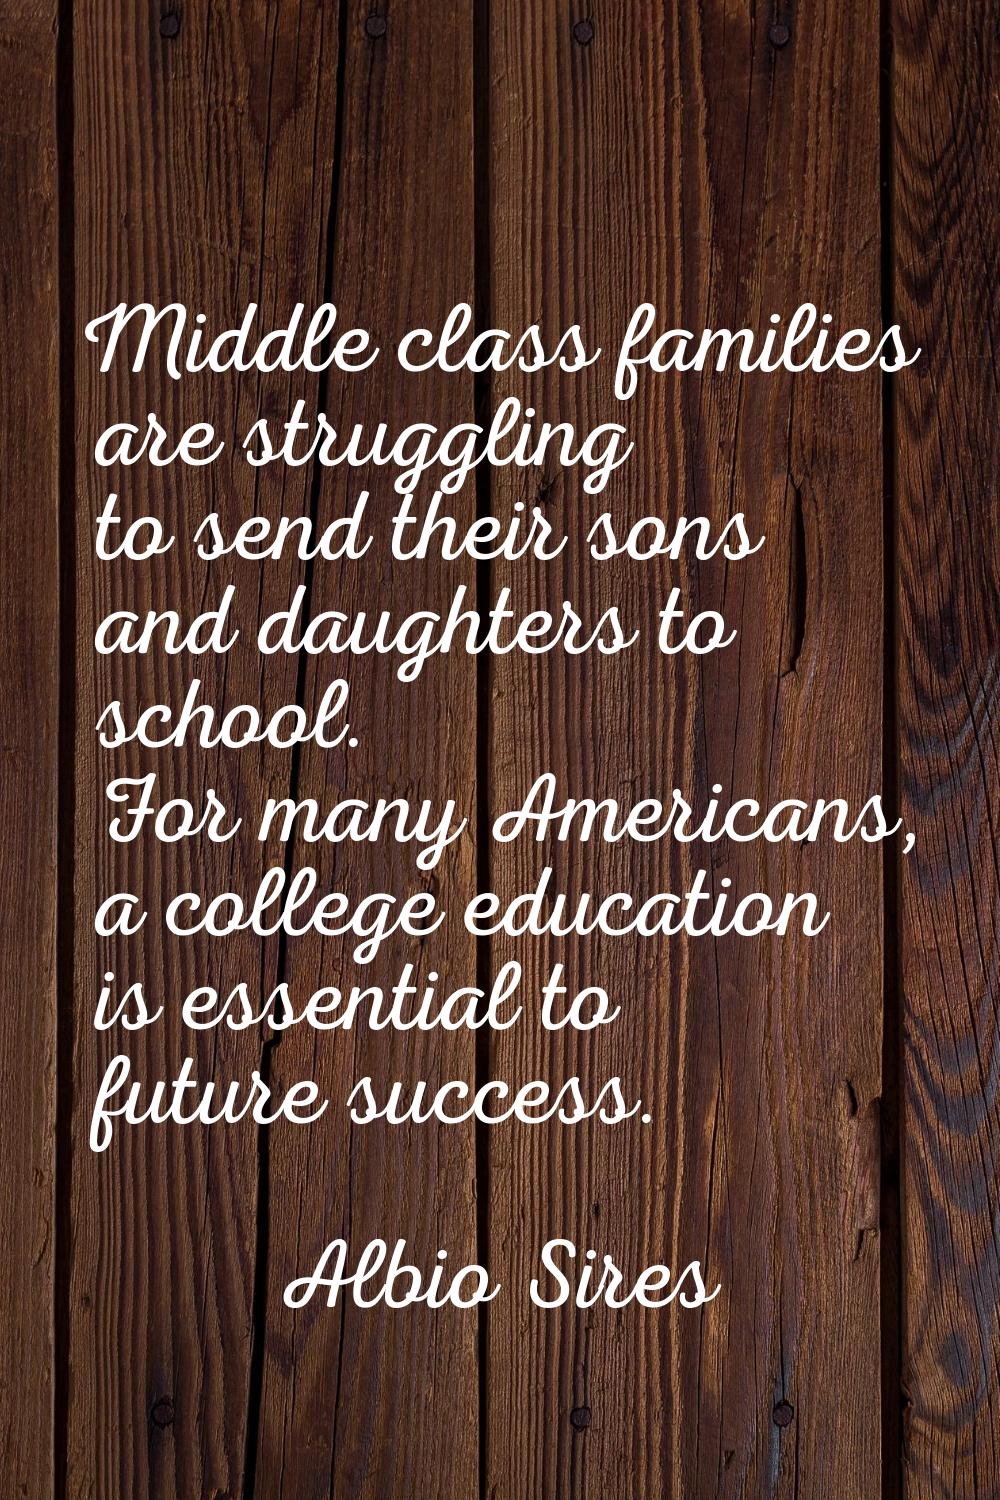 Middle class families are struggling to send their sons and daughters to school. For many Americans